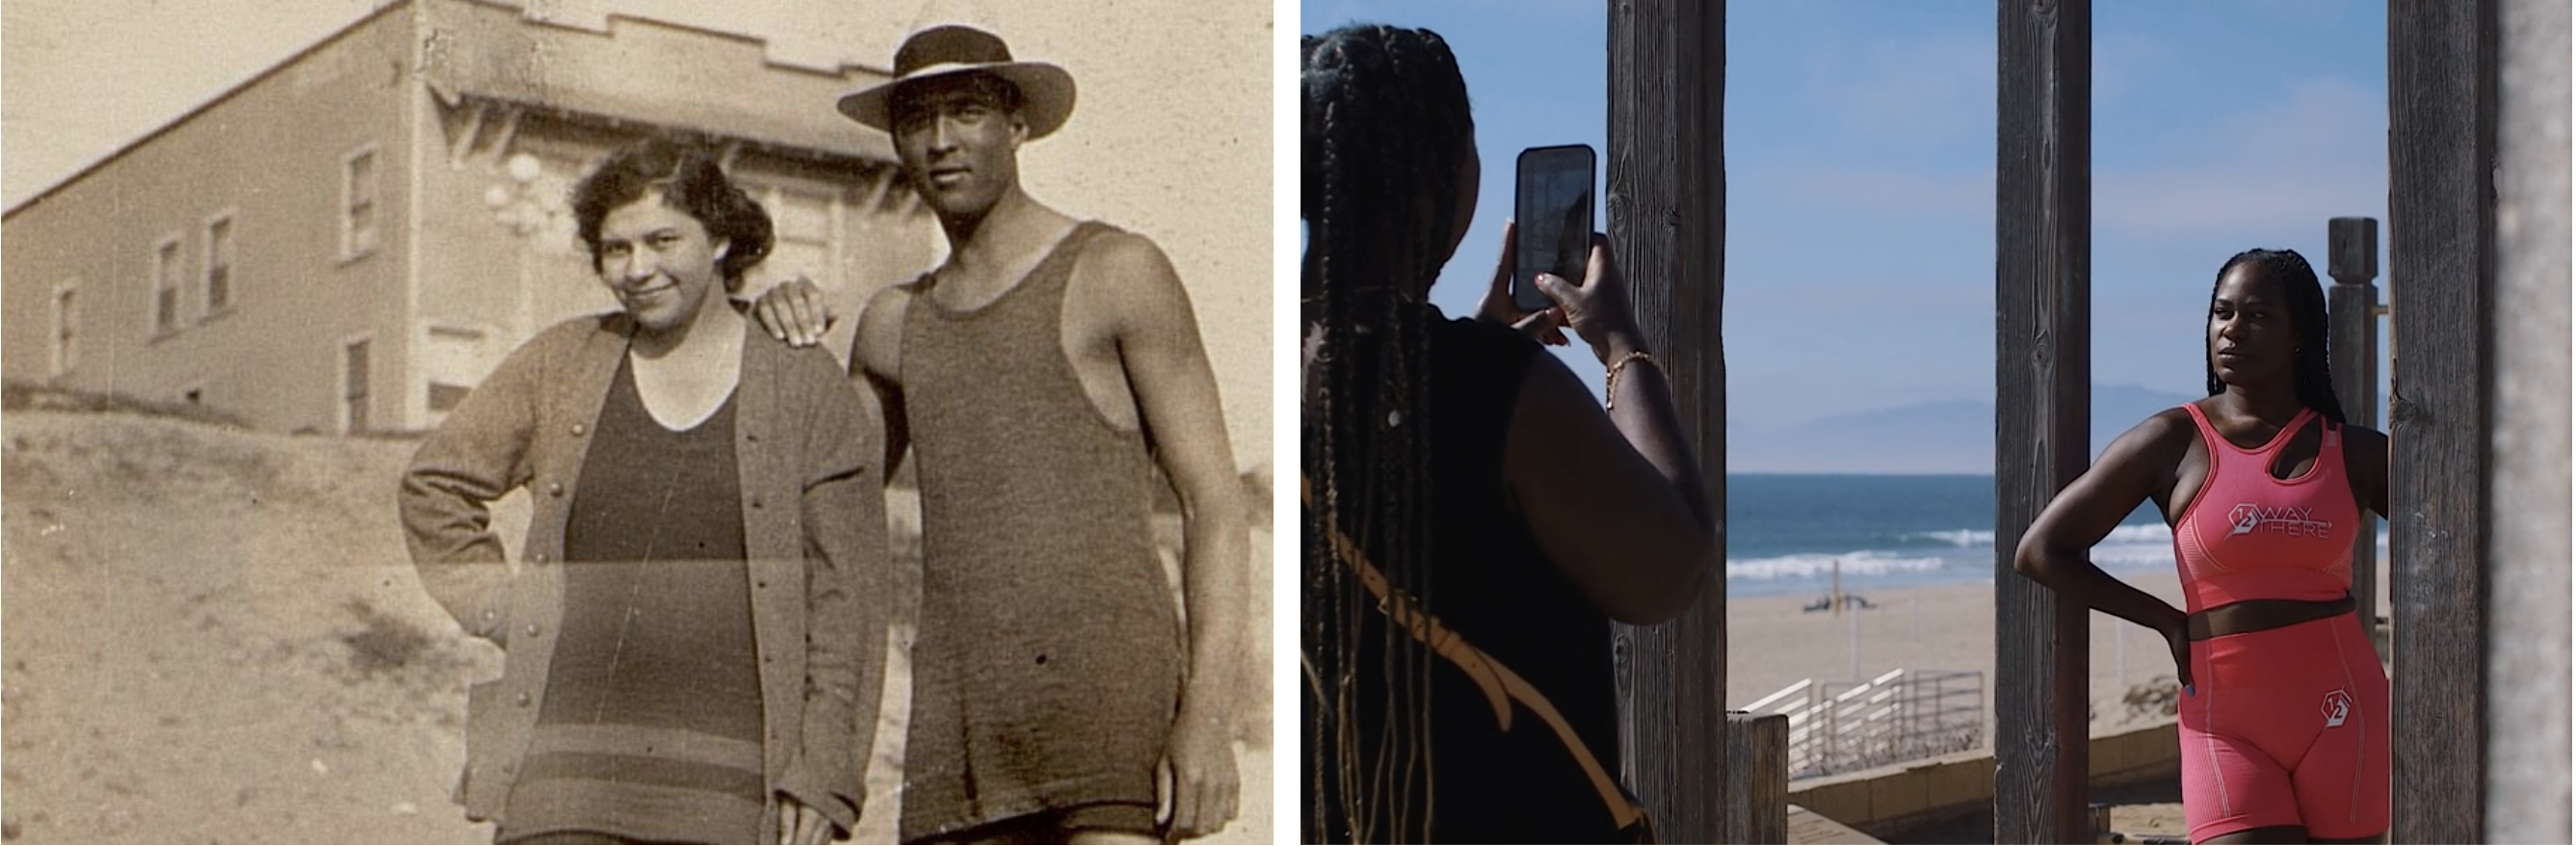 On the left, a sepia-toned photo of a couple, dressed in conservative beachwear, smiling, the man's hand on the woman's shoulder. On the right, a woman in a neon pink workout outfit poses as someone takes a photo with a mobile phone.